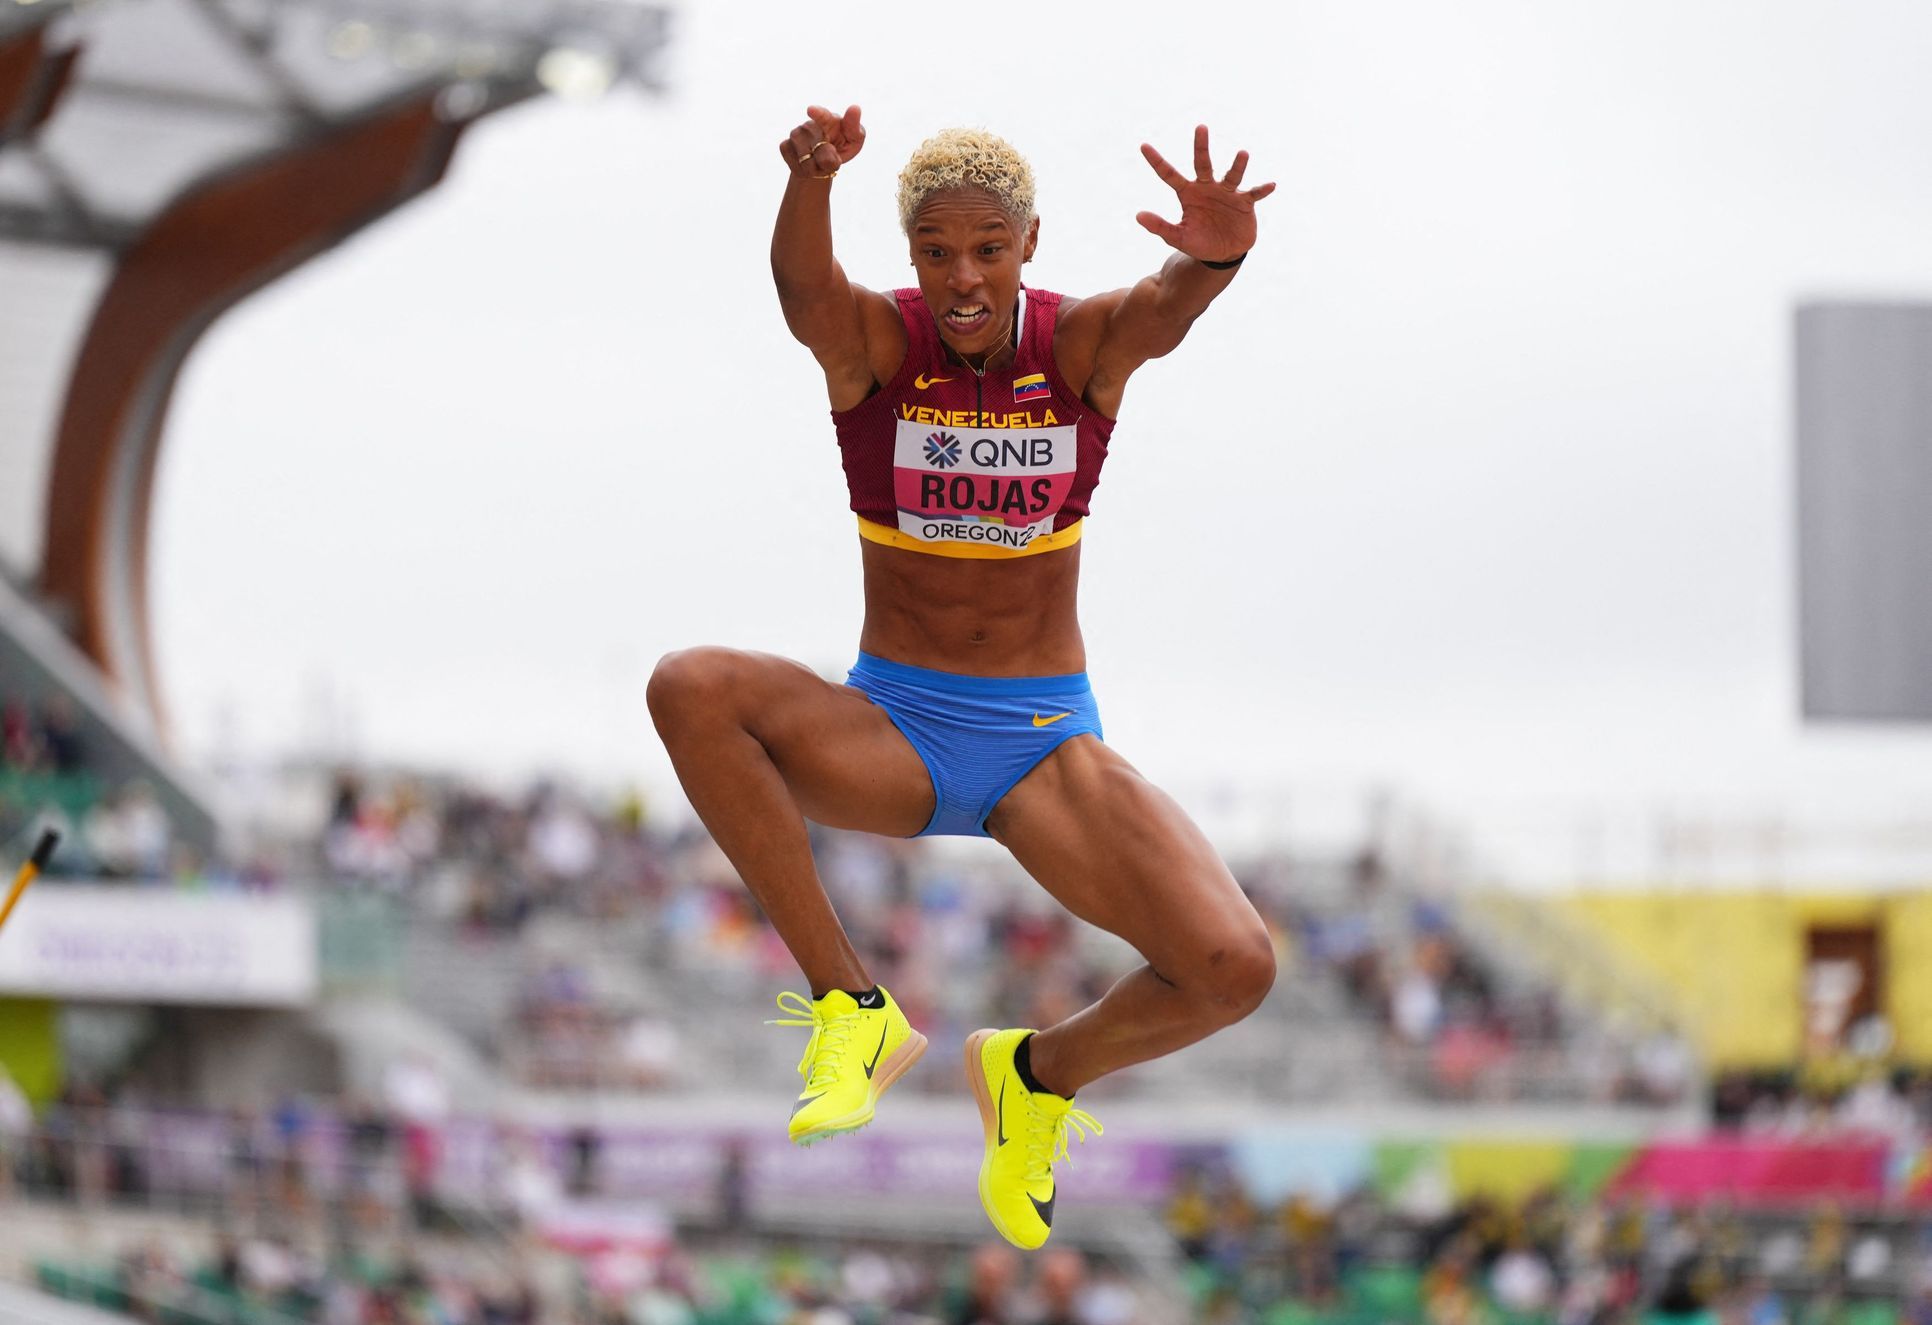 Rojas is the first female athlete to win her third triple jump world title.  He was dissatisfied